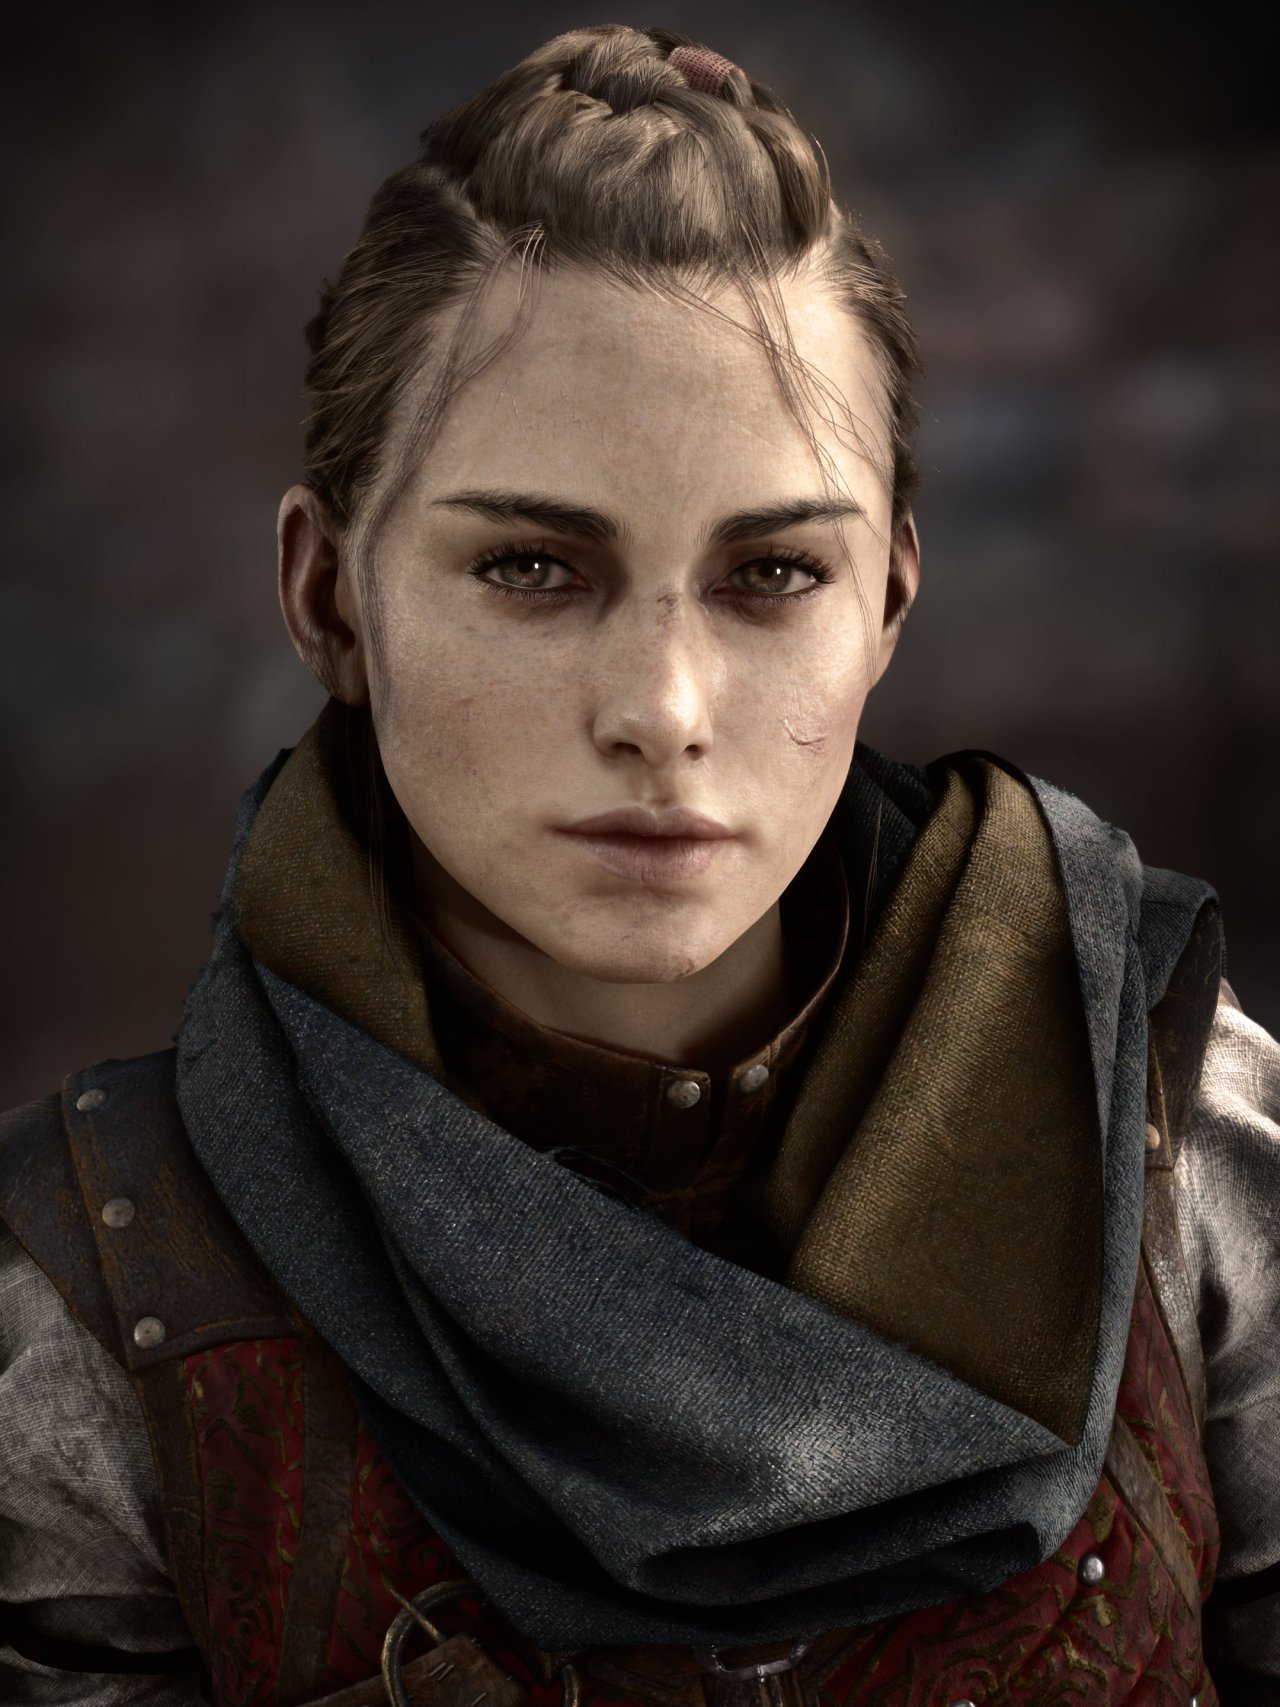 A Plague Tale 3 Seems to be in Development, as Per Job Ads